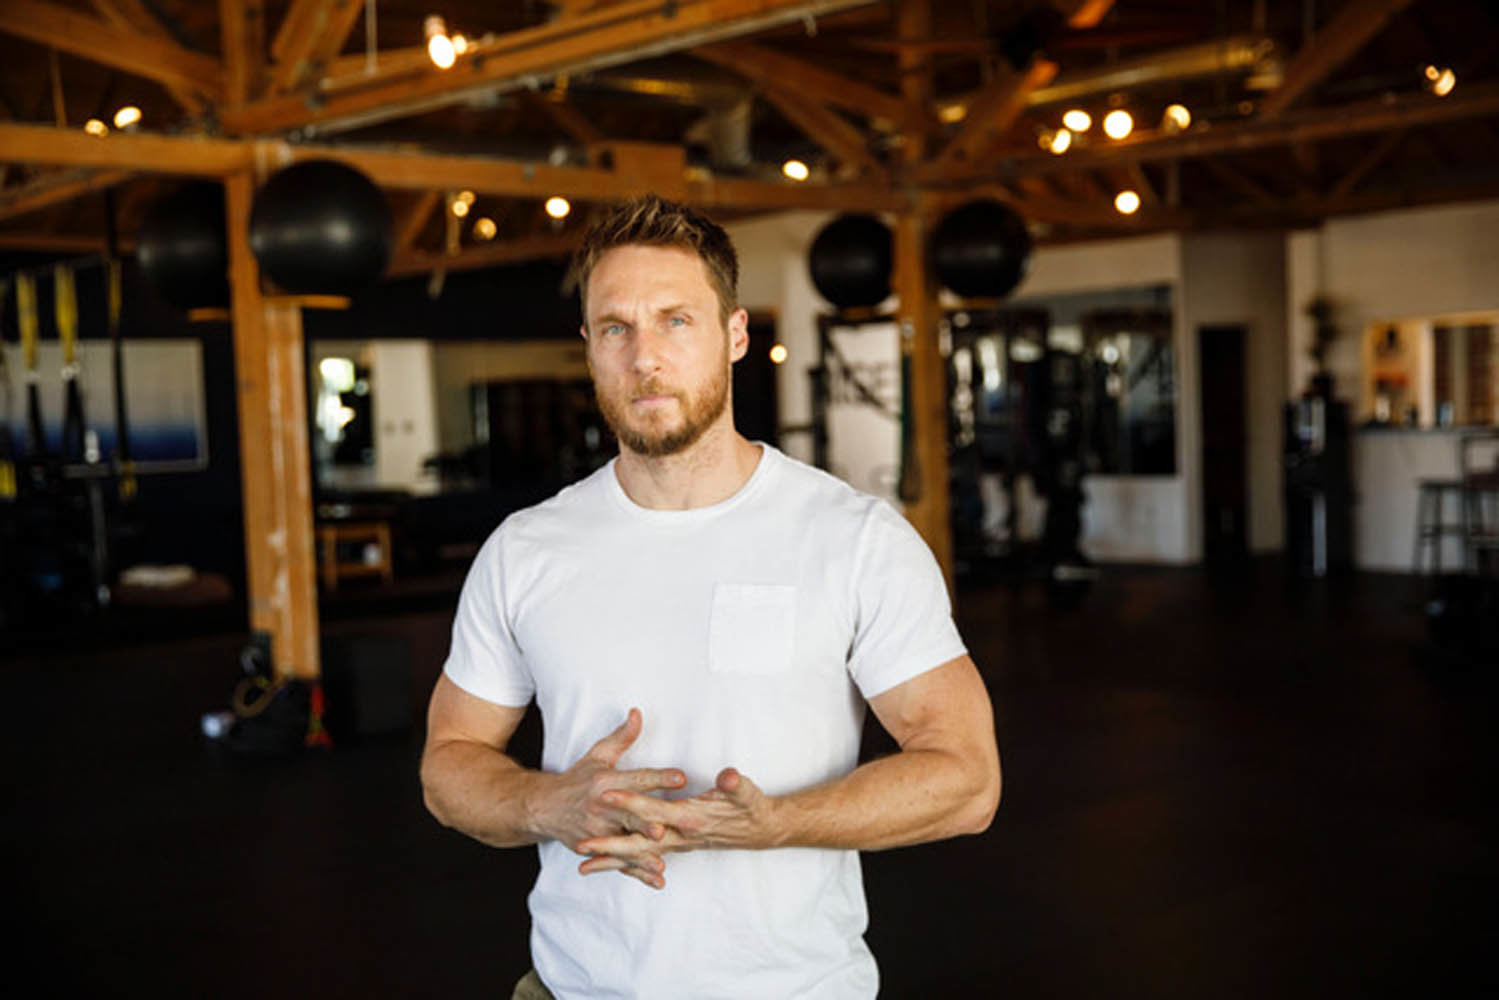 Springfield native Jason Walsh is a personal trainer to Hollywood stars, including Matt Damon, Jennifer Aniston and Brie Larson.